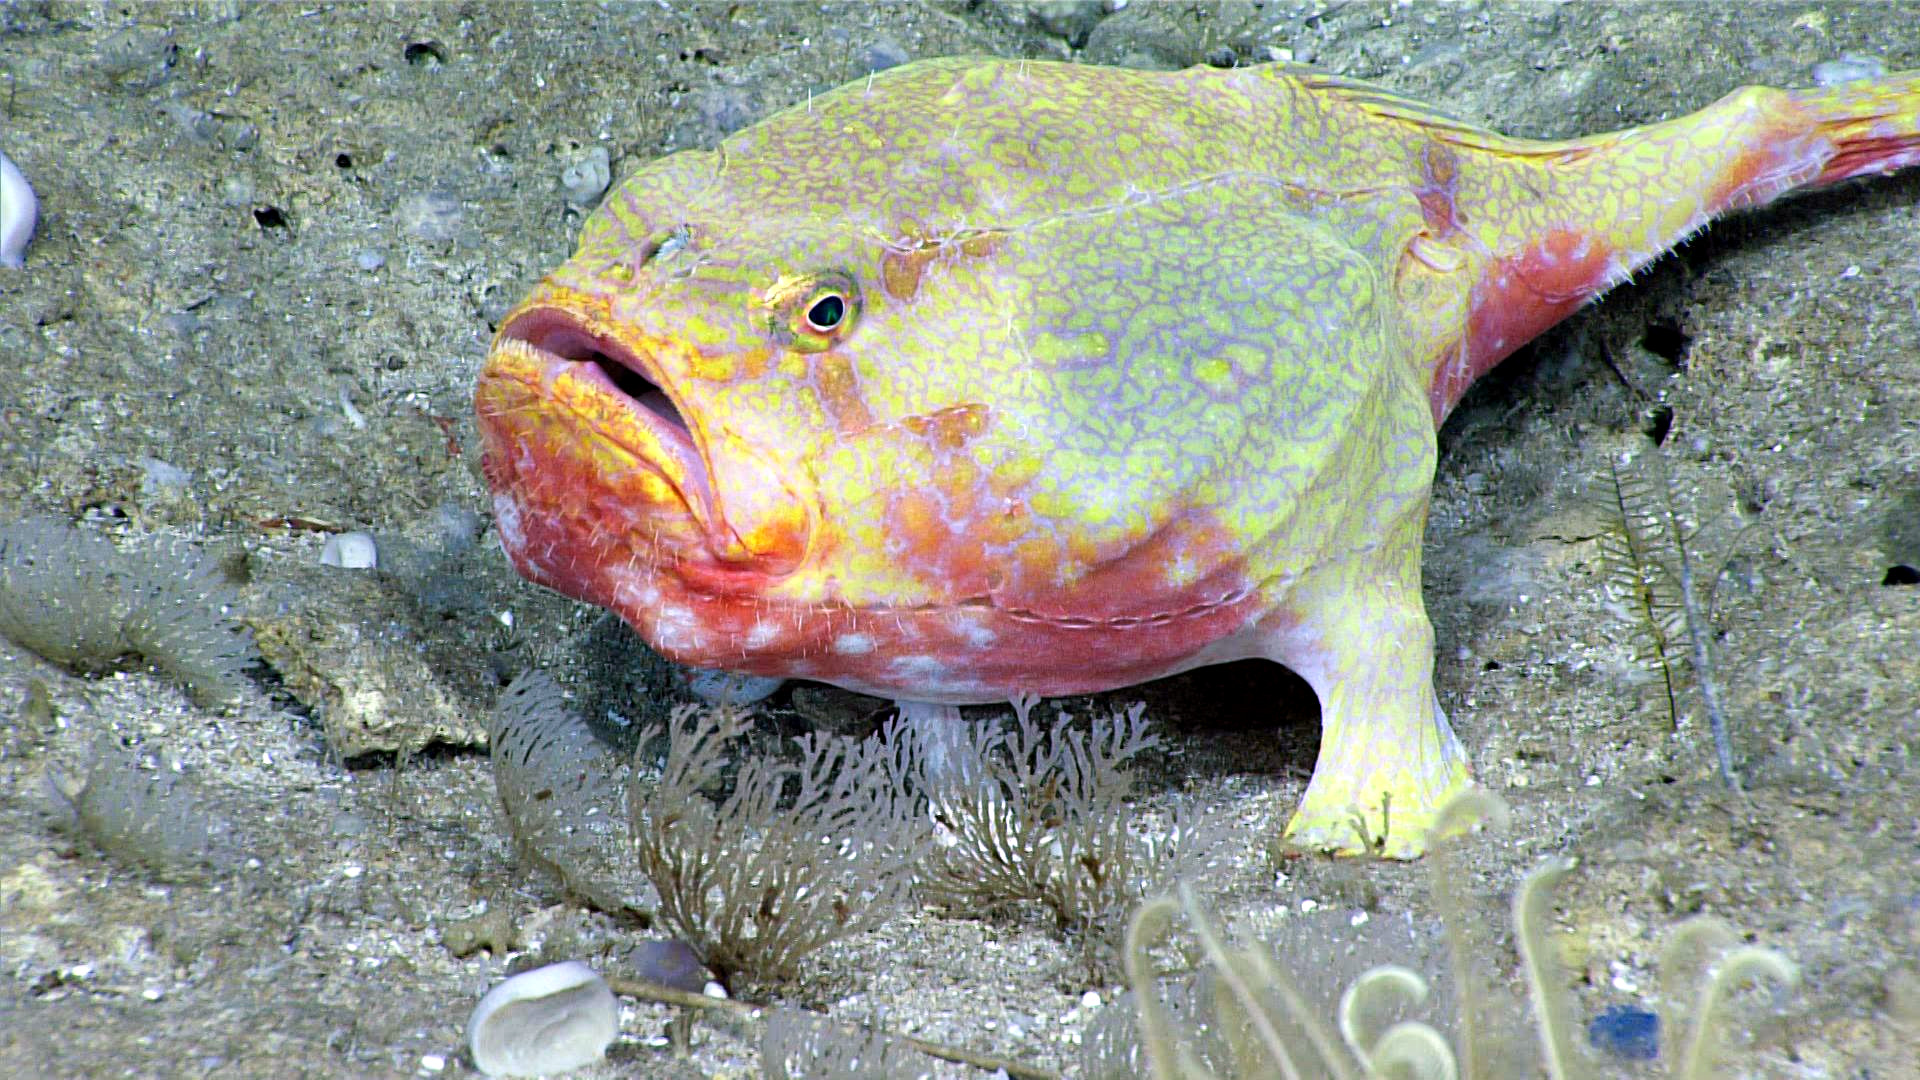 Deepsea Highlights From The Okeanos Explorer’s Latest Expedition